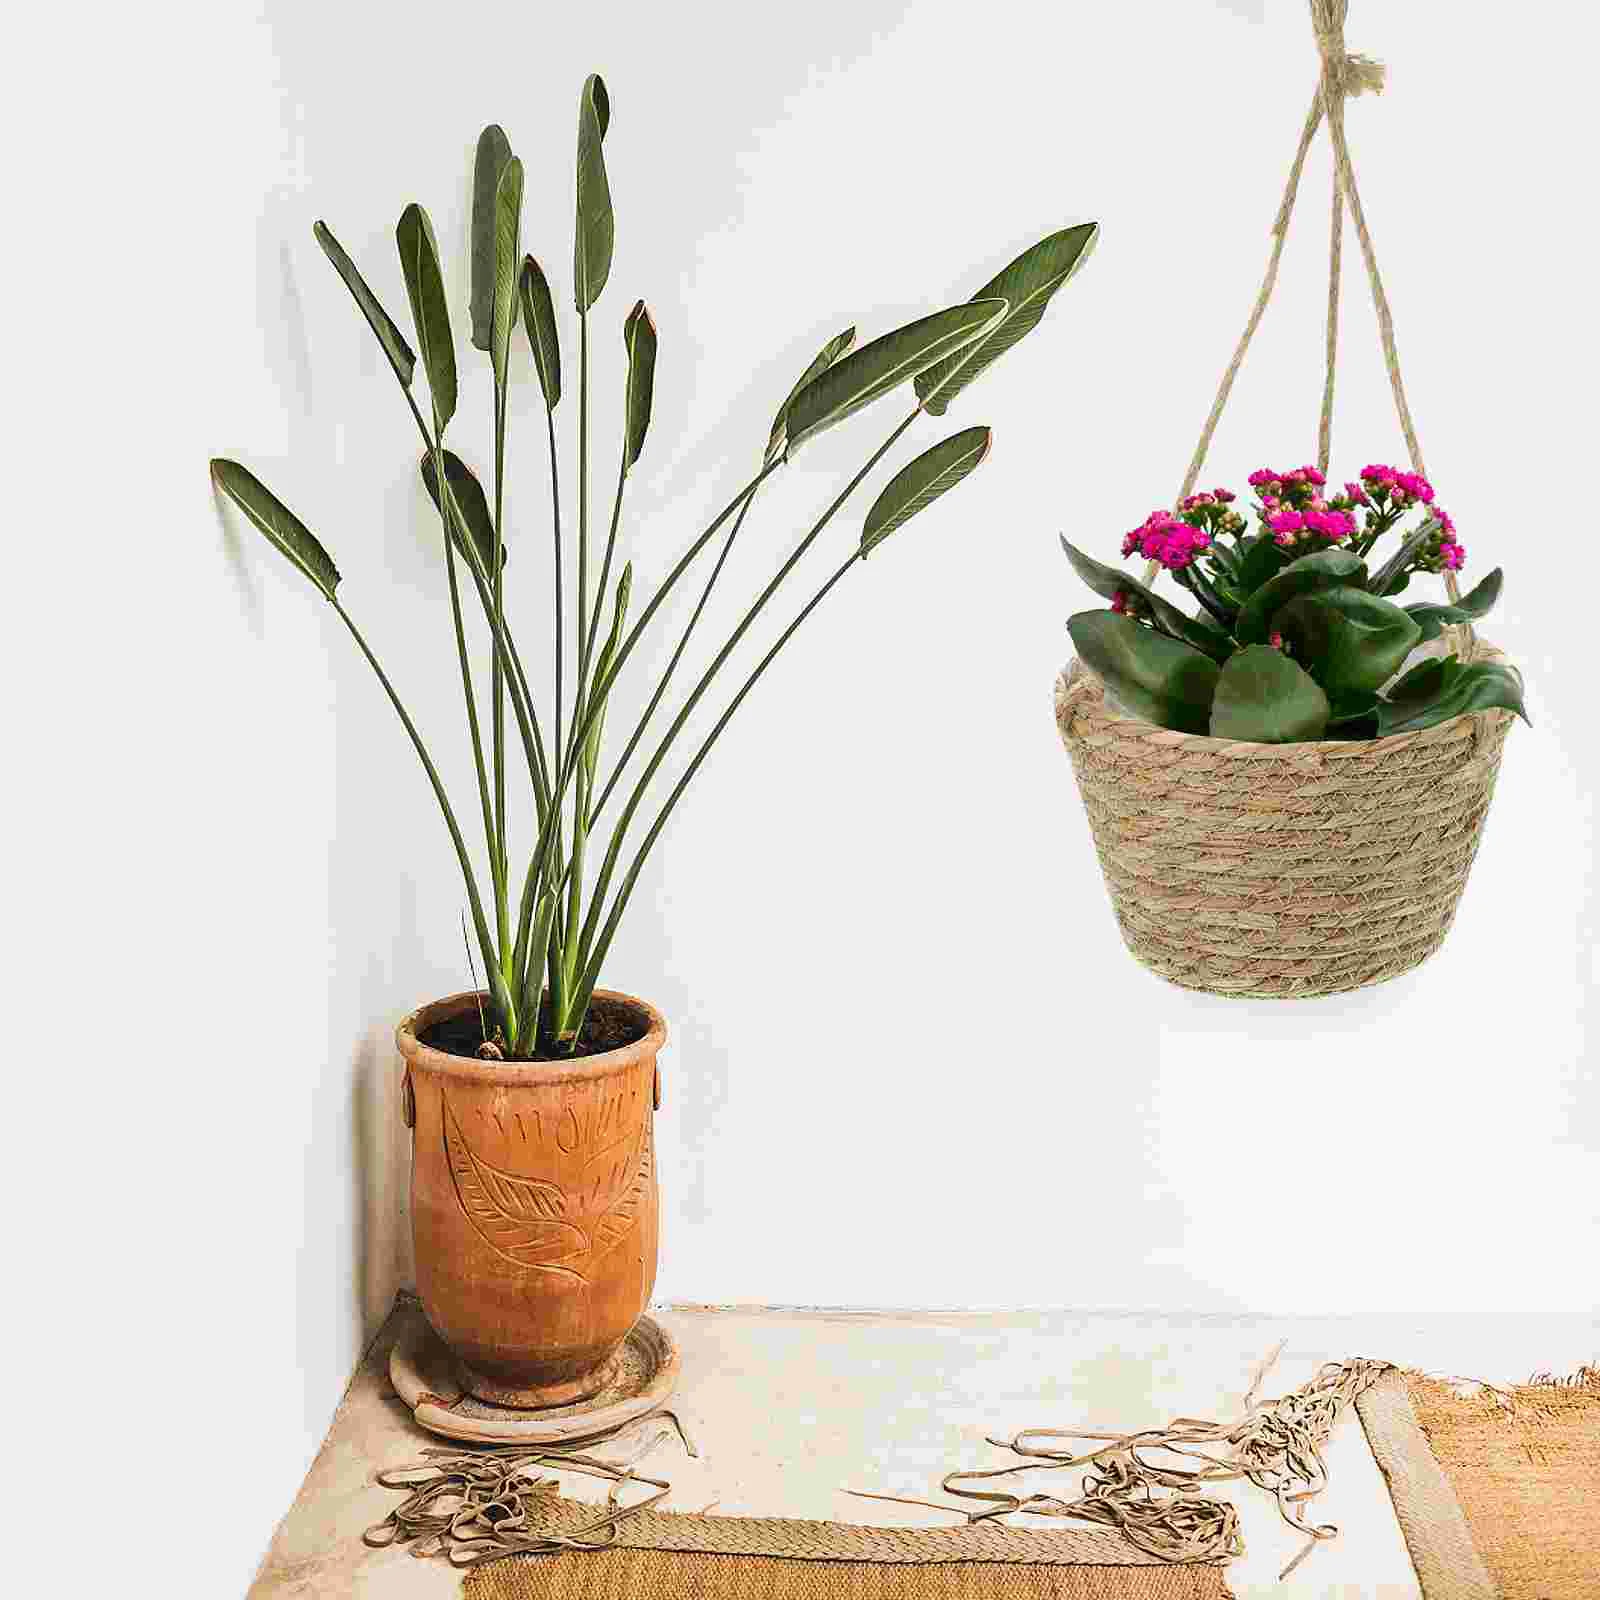 

Wall Holder Succulent Planters Hanging Indoor Plants Flower Pots Rattan Cattail Grass Holders For flowers